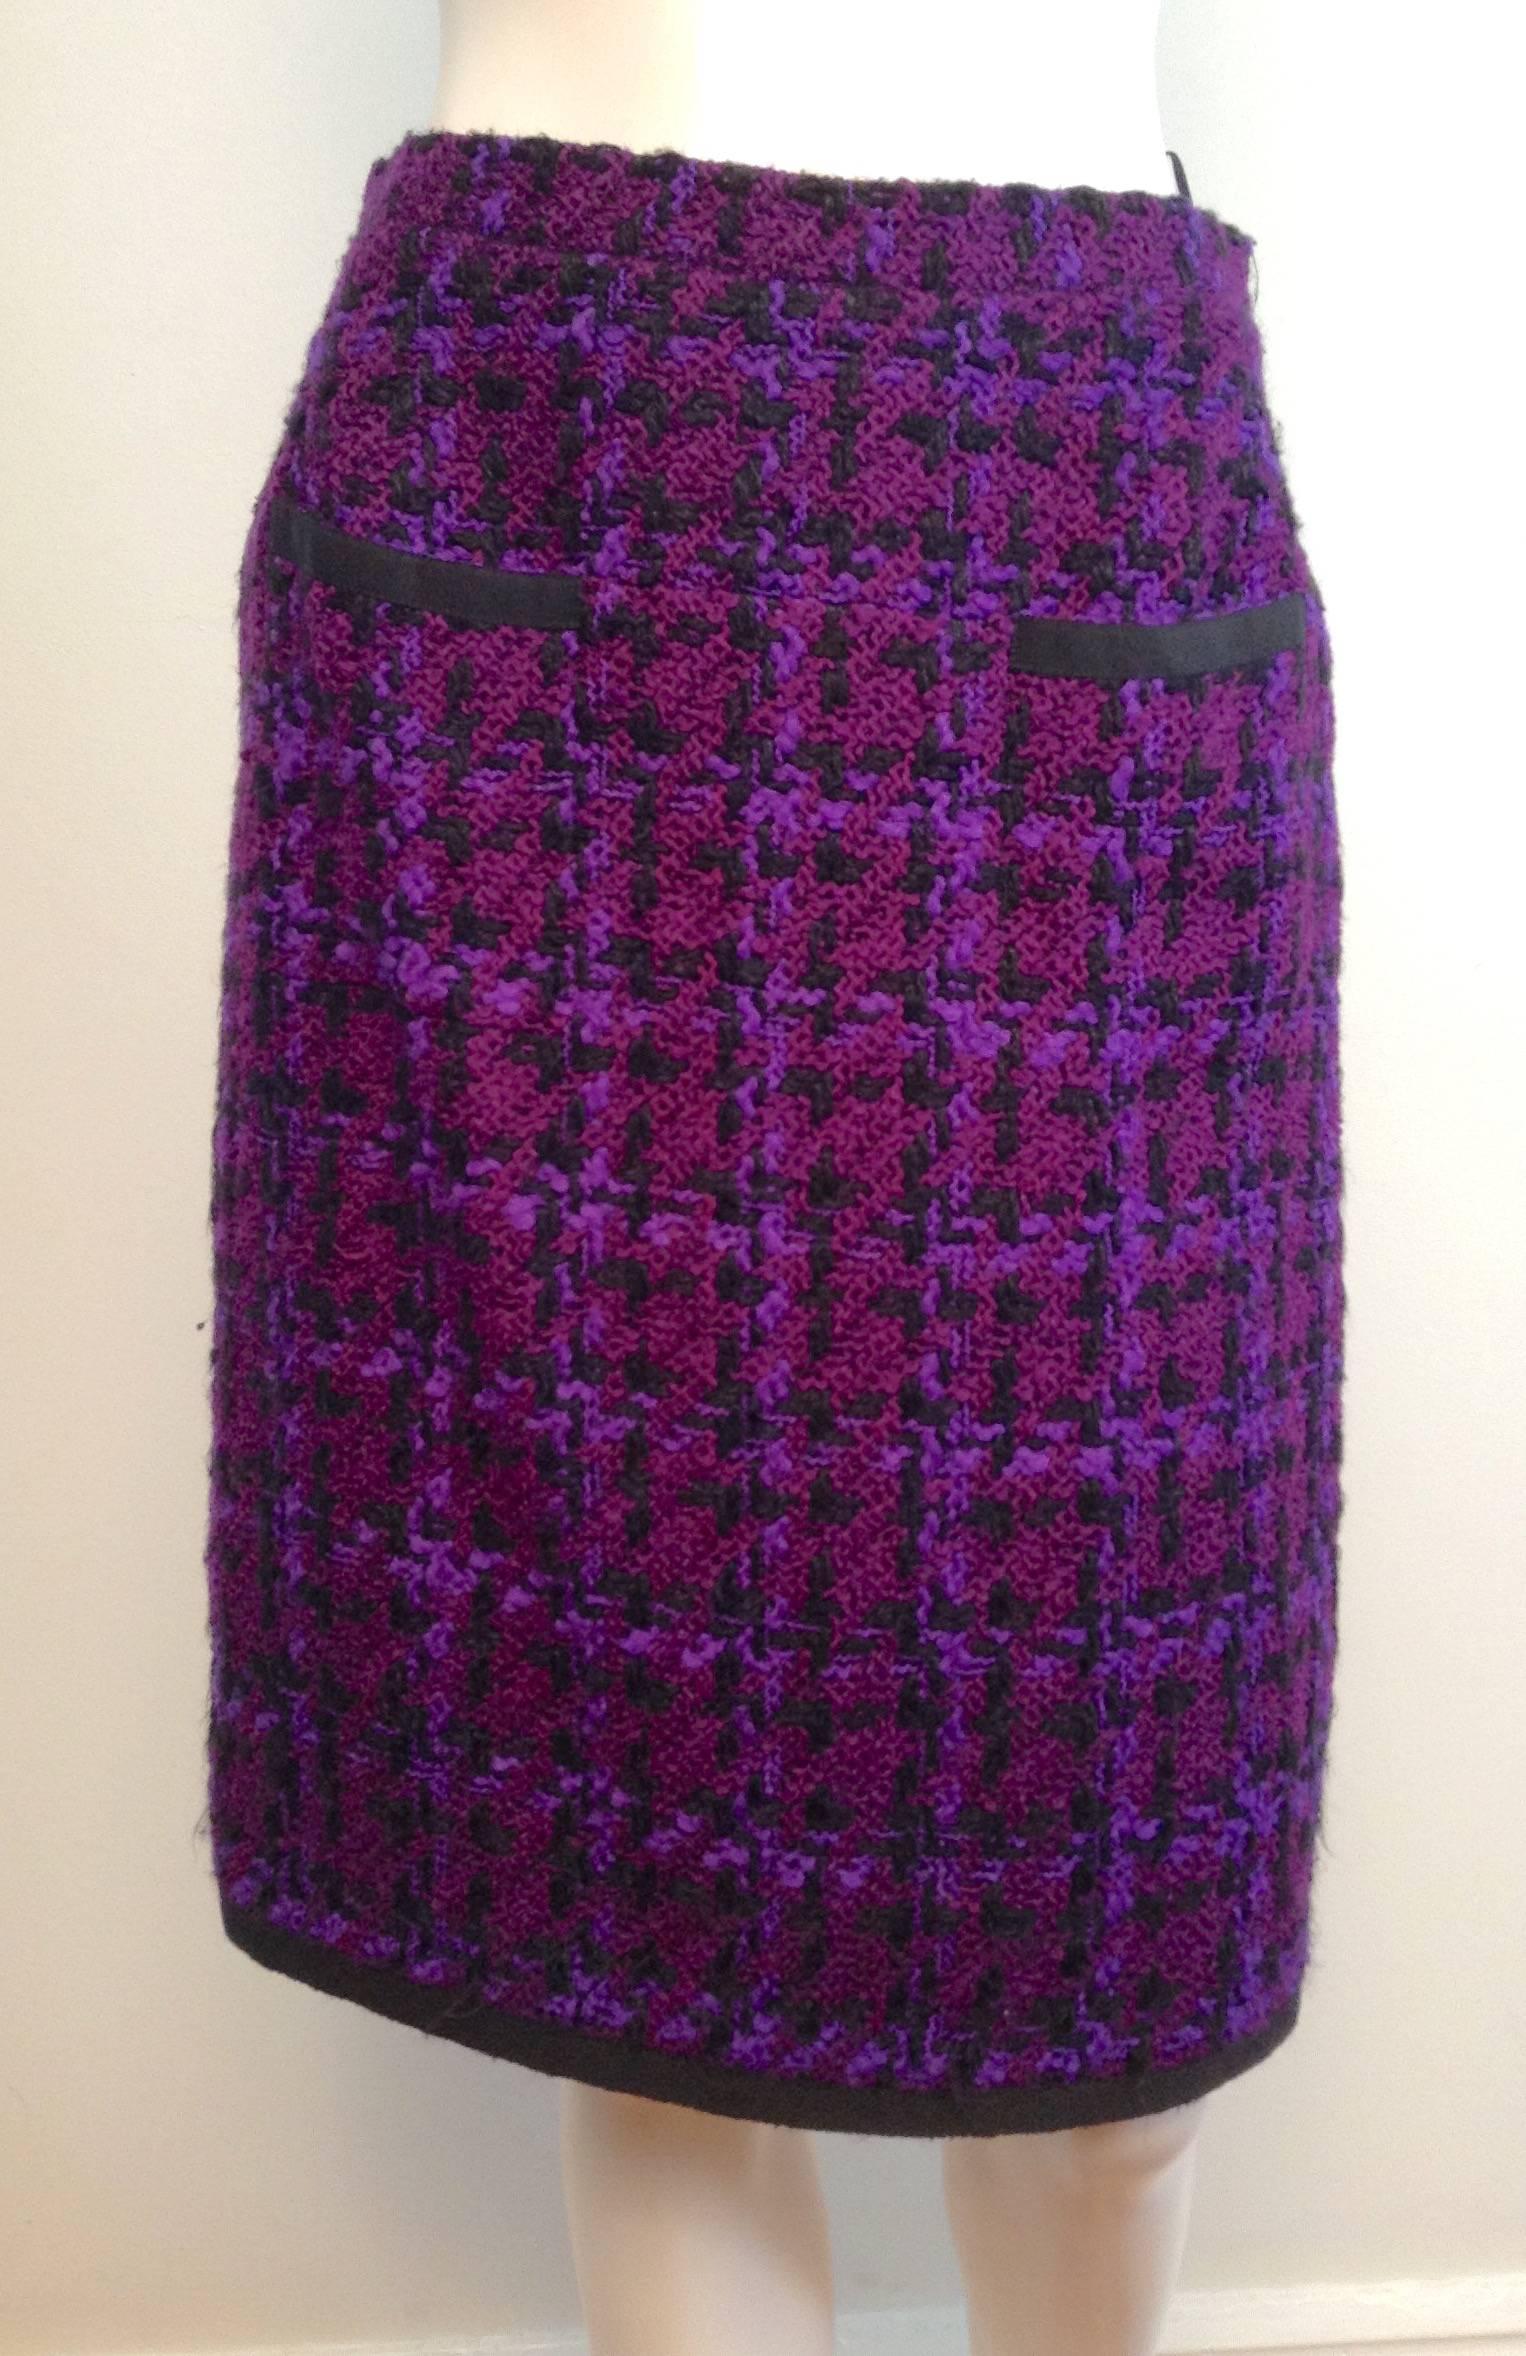 Chanel Purple Tweed Skirt Suit Size 38/4 In Good Condition For Sale In Toronto, Ontario